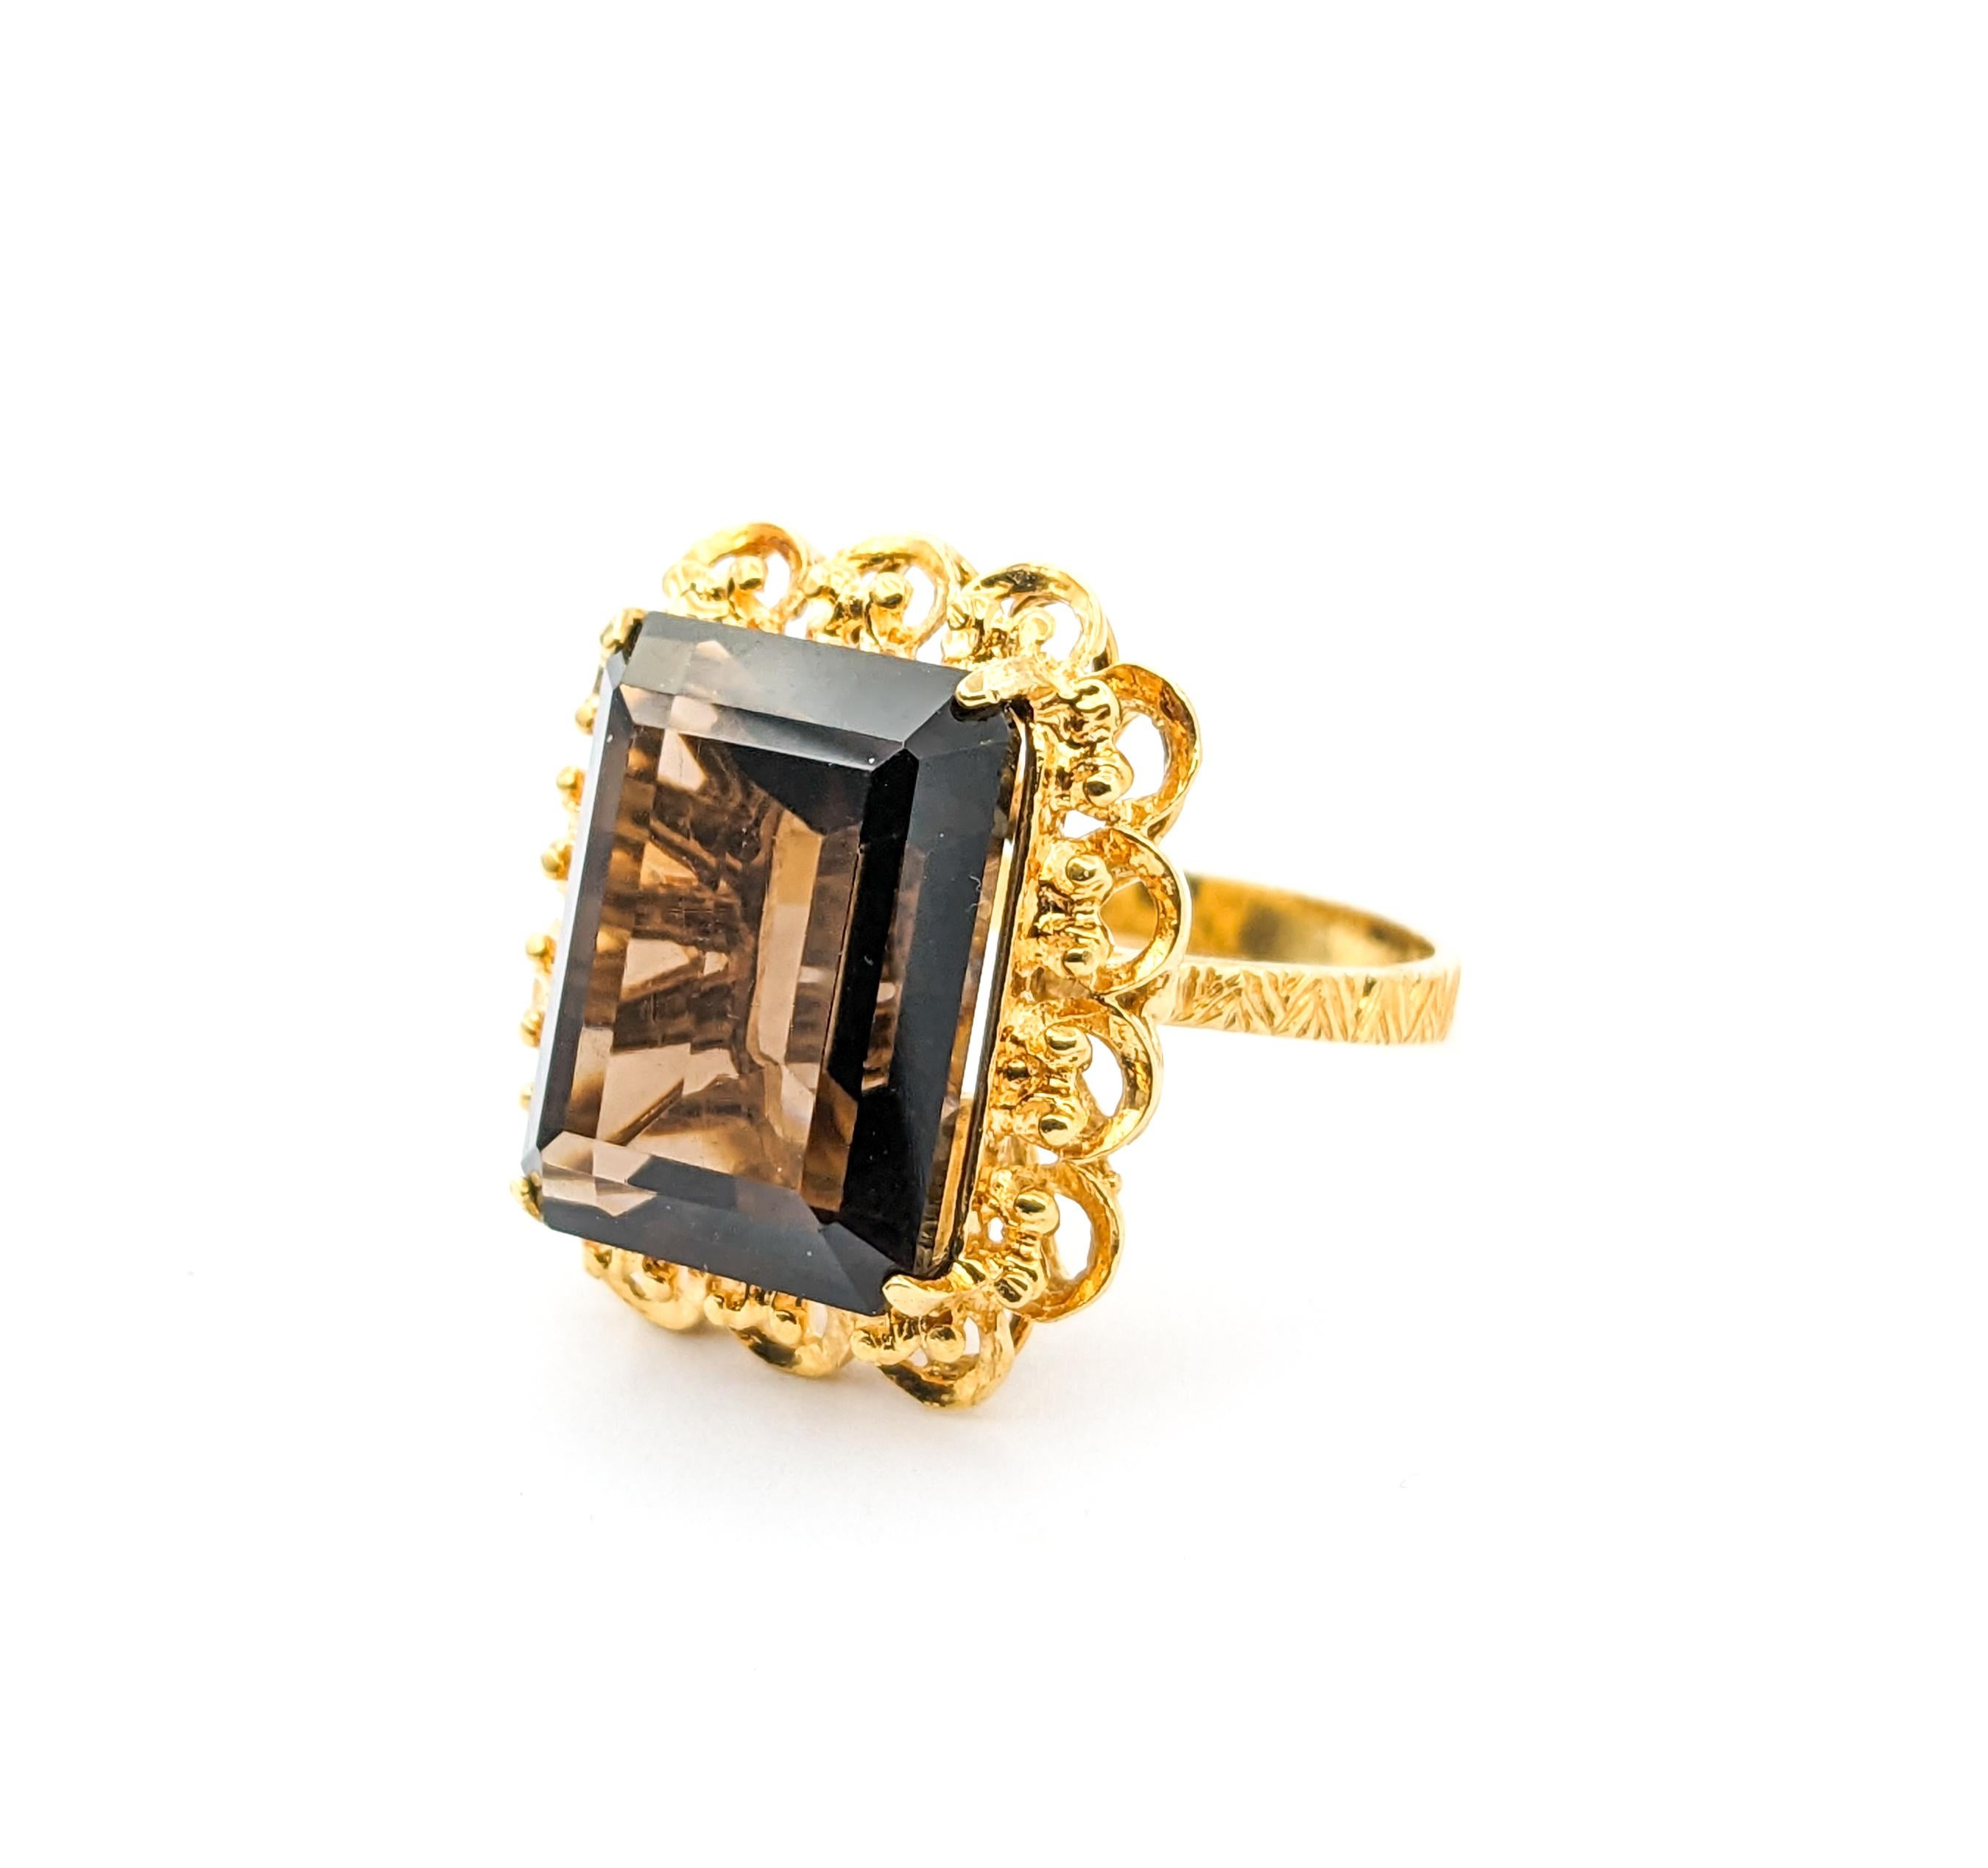 Elaborate 18k Smoky Quartz Cocktail Ring In Excellent Condition For Sale In Bloomington, MN